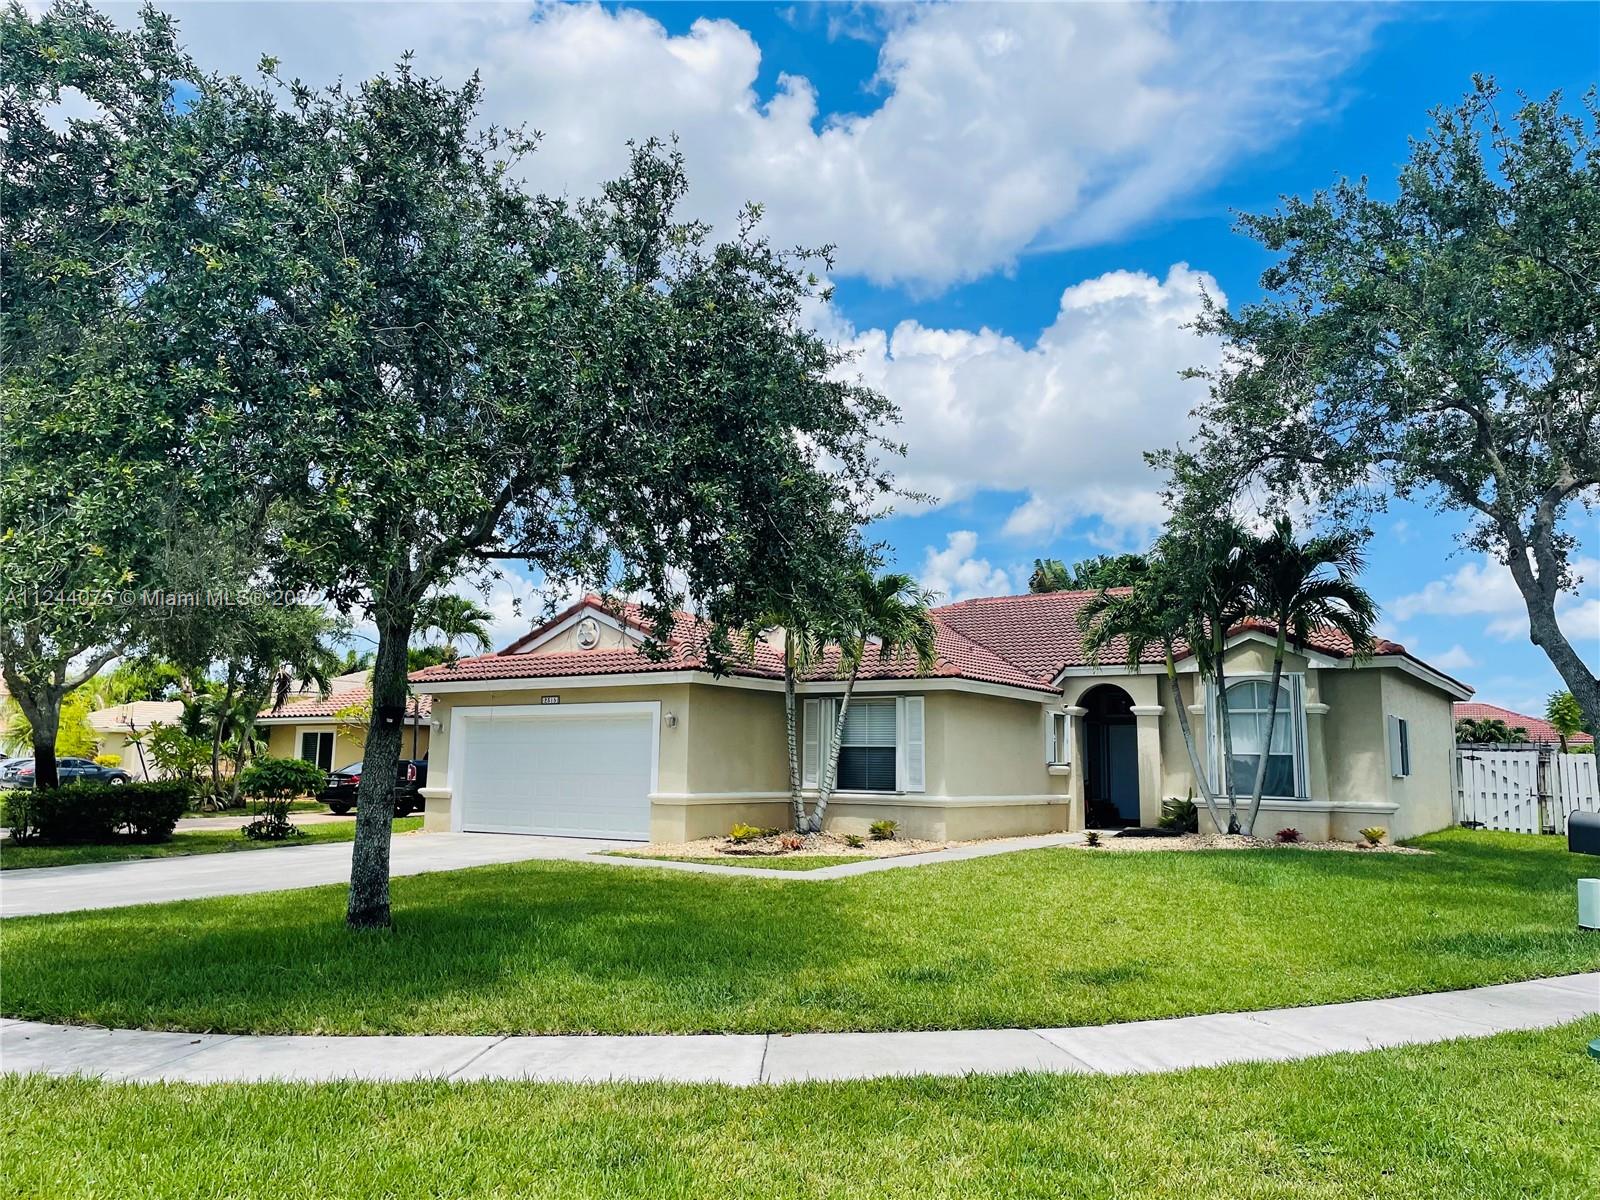 Key Stone is a gated community located in the beautiful city of Pembroke Pines. The home was built on a cul-de-sac allowing it to have a largest lot in the development. The location also provides additional parking area to accommodate guest parking. 
This home is walking distance to a park and is surrounded by great schools, perfect for a growing family. 

The property is priced to sell fast and the seller is very motivated to find a new buyer. 

Current tenant is in the process of moving out. 
More property pictures coming soon as the tenet moves out missing items.  

Contact us for showings.